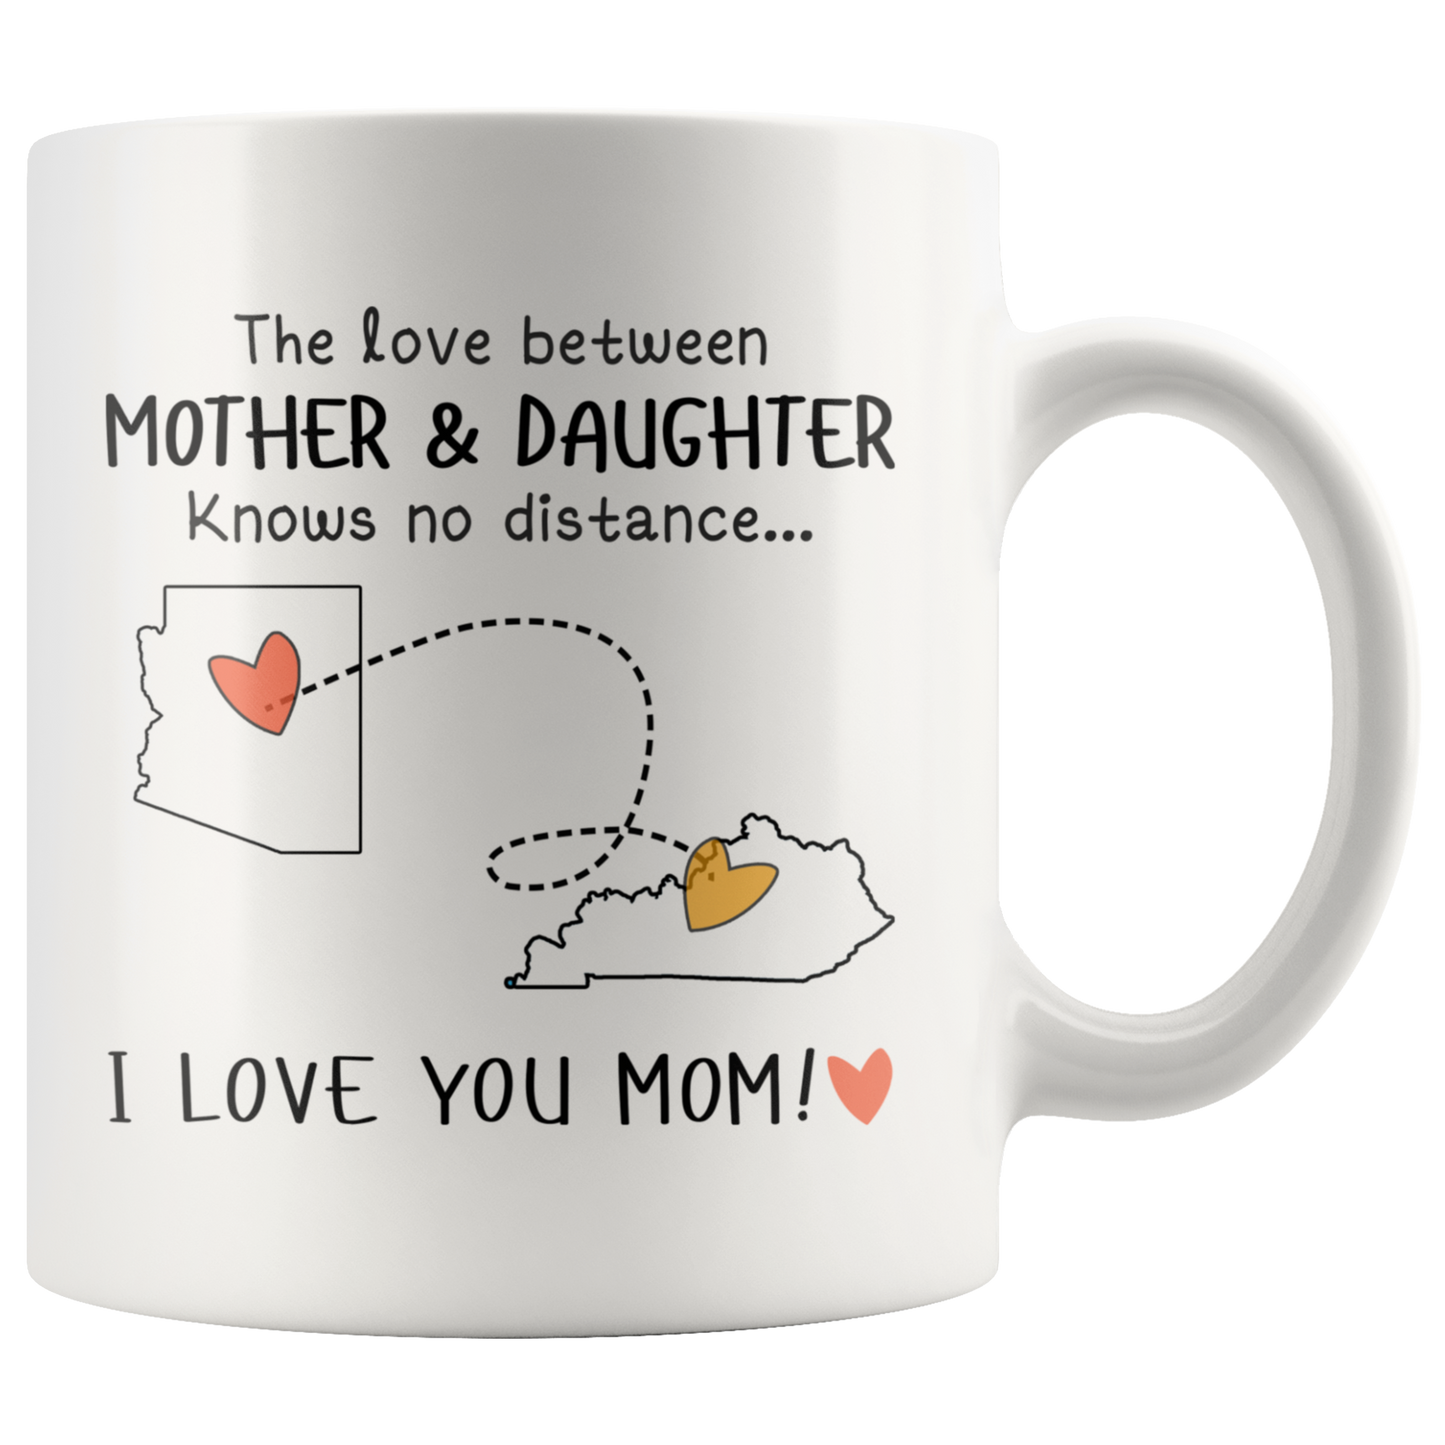 HNV-CUS-GRAND-sp-26526 - [ Arizona | Kentucky ] (mug_11oz_white) Mothers Day Gifts Personalized Mother Day Gifts Coffee Mug F